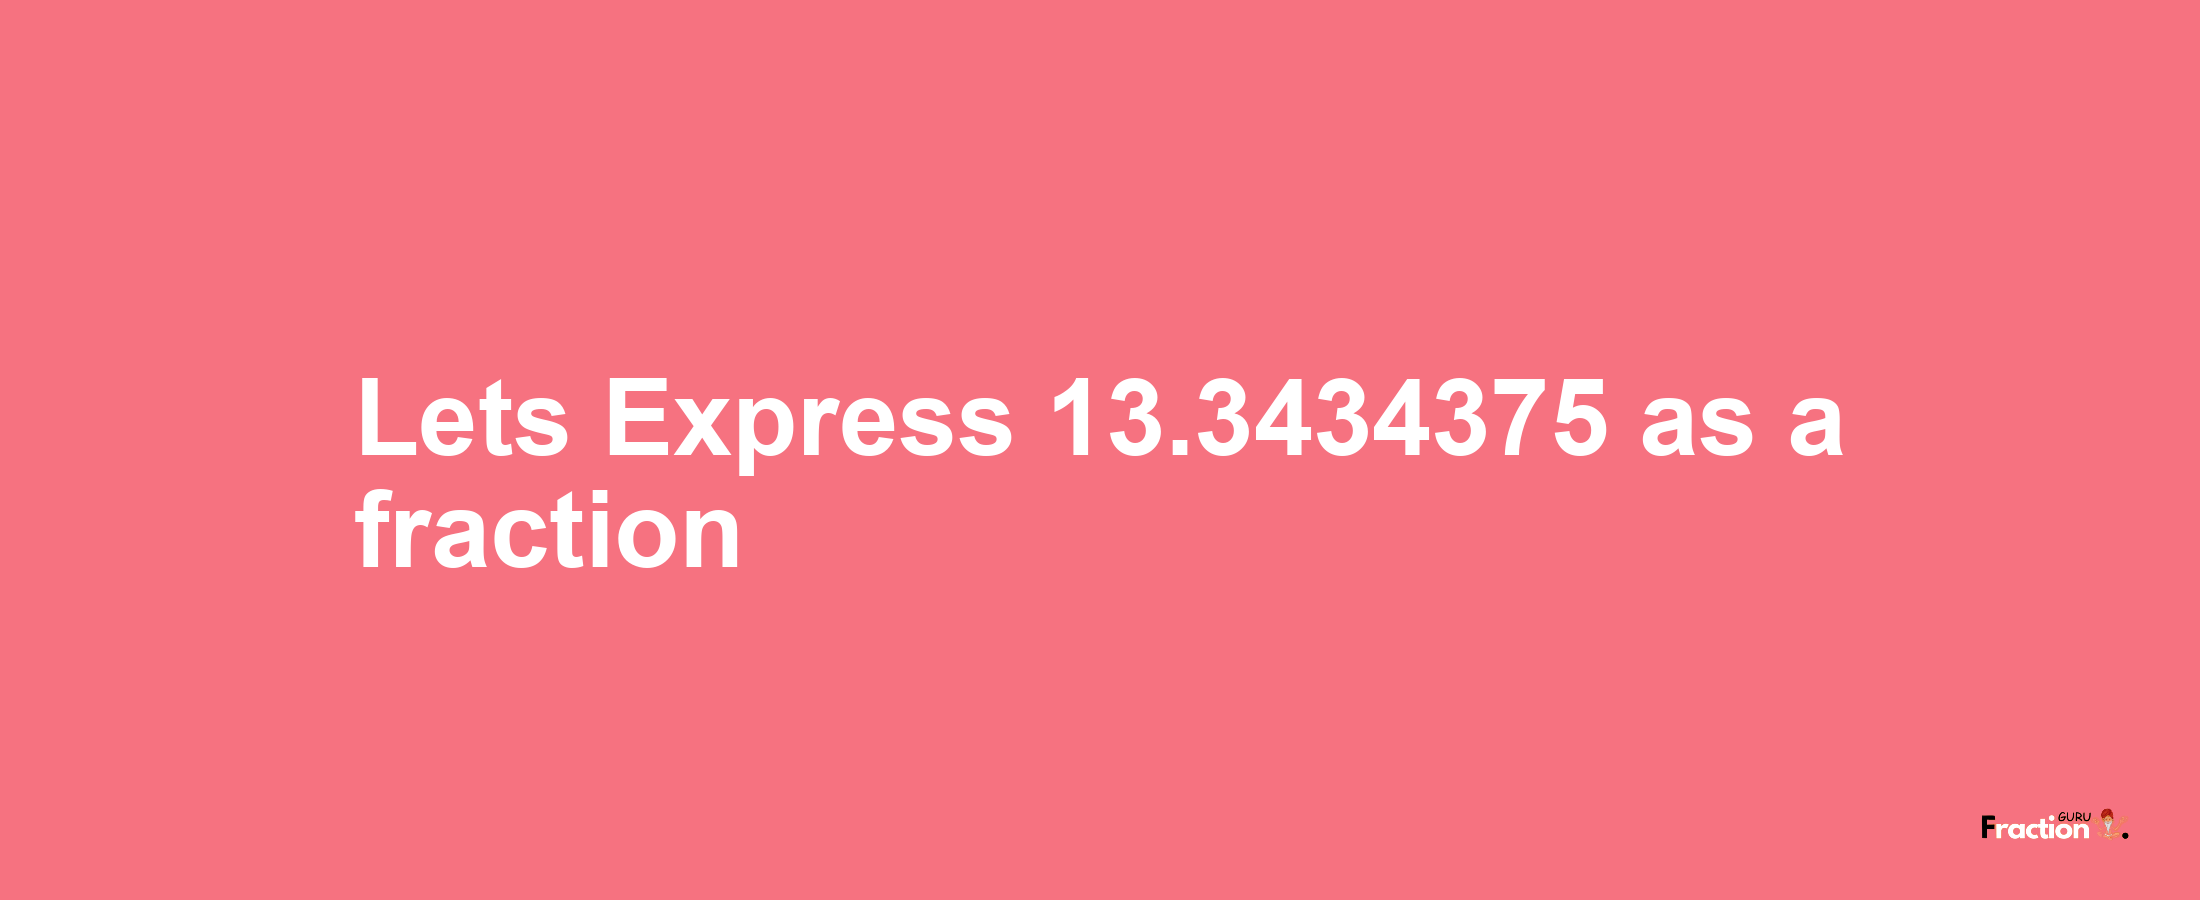 Lets Express 13.3434375 as afraction